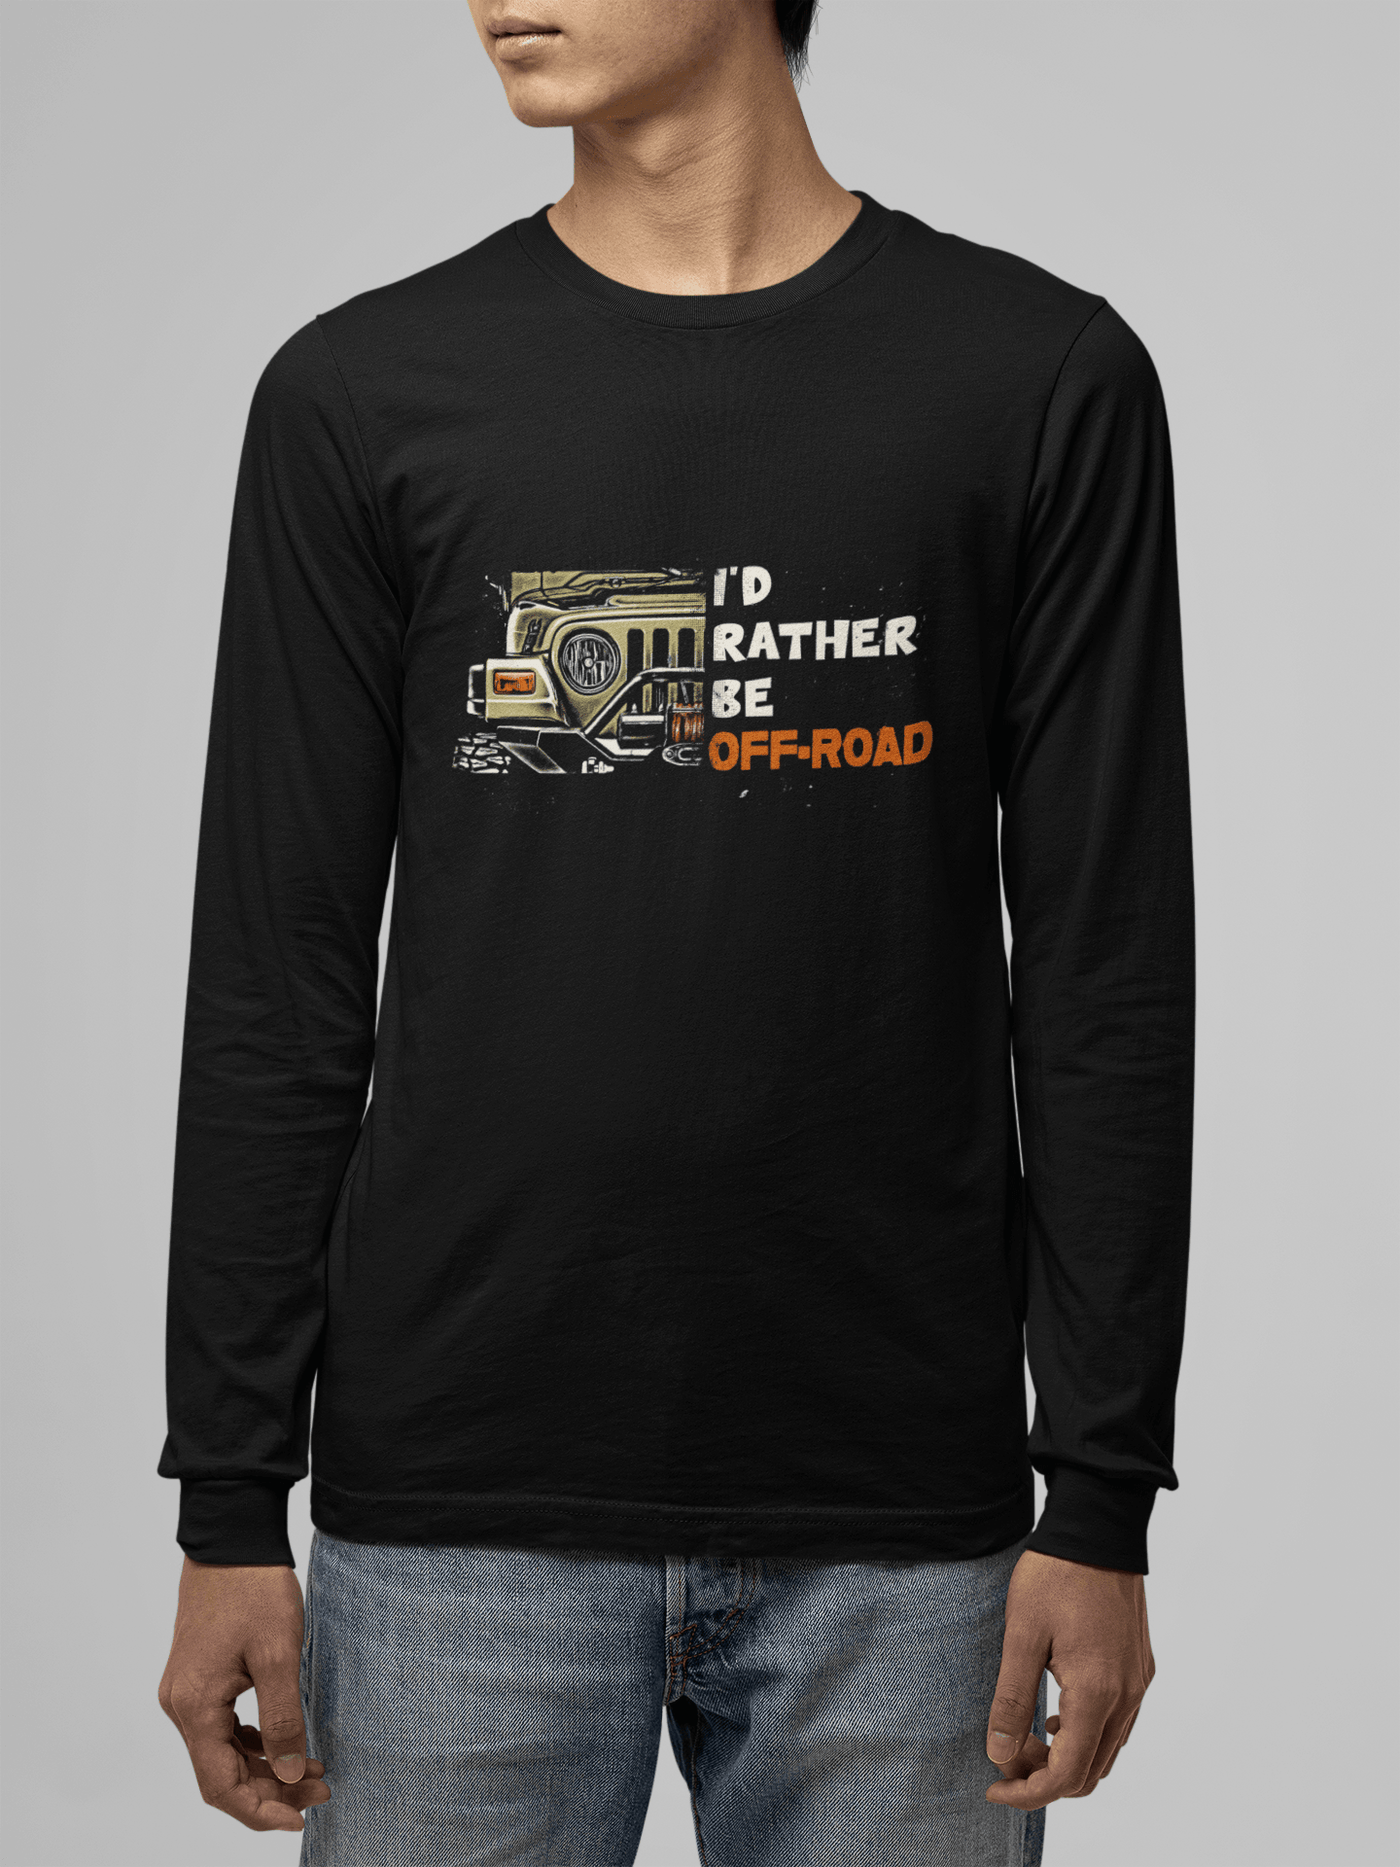 Off-Road Long-Sleeve Tee - Goats Trail